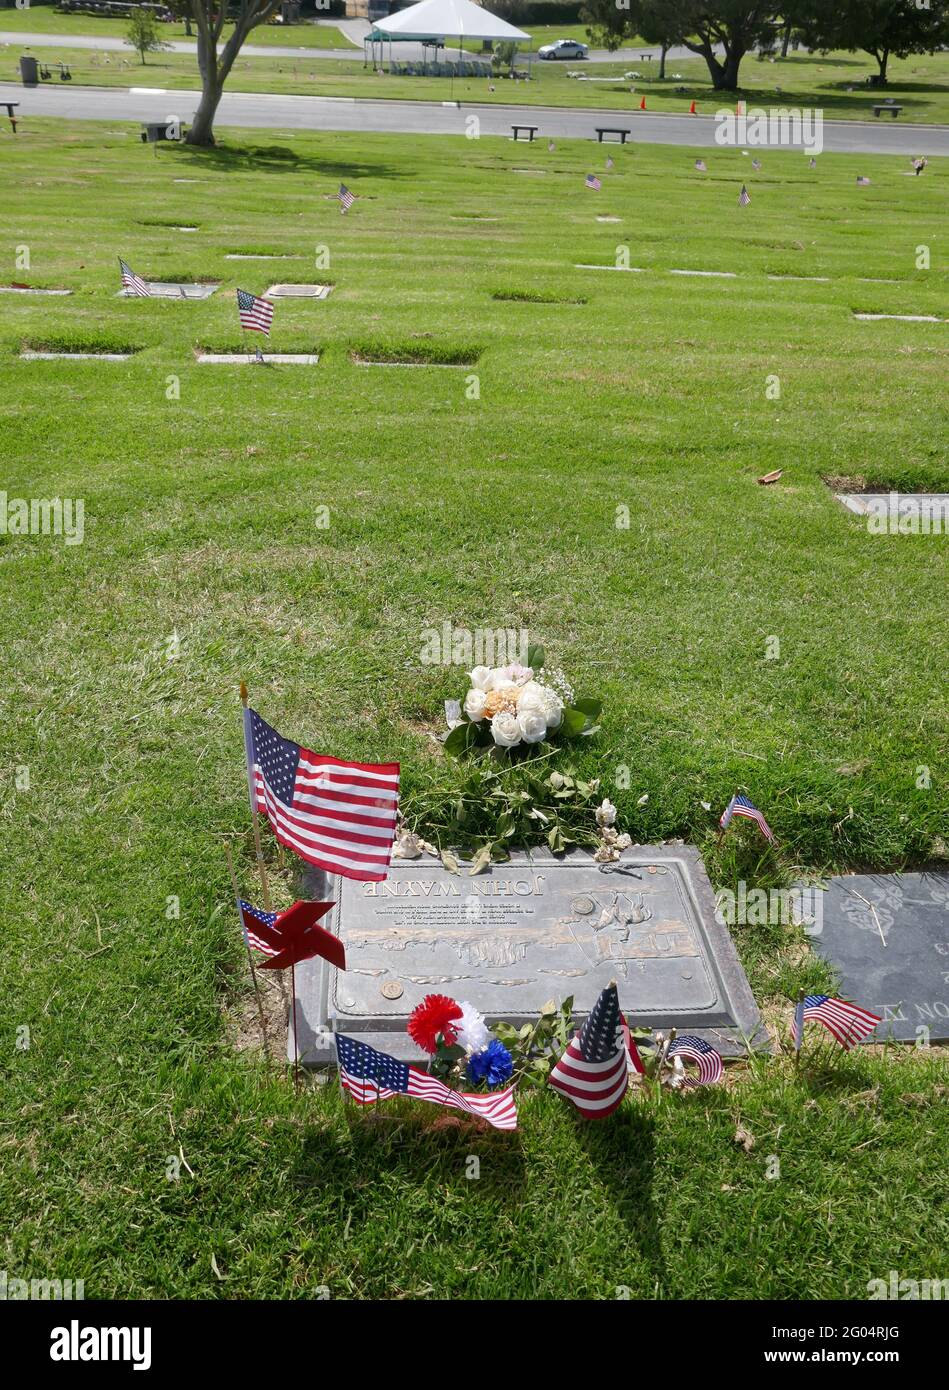 Corona del Mar, California, USA 29th May 2021 A general view of atmosphere of actor John Wayne's Grave at Pacific View Memorial Park at 3500 Pacific View Drive in Corona del Mar, California, USA. Photo by Barry King/Alamy Stock Photo Stock Photo